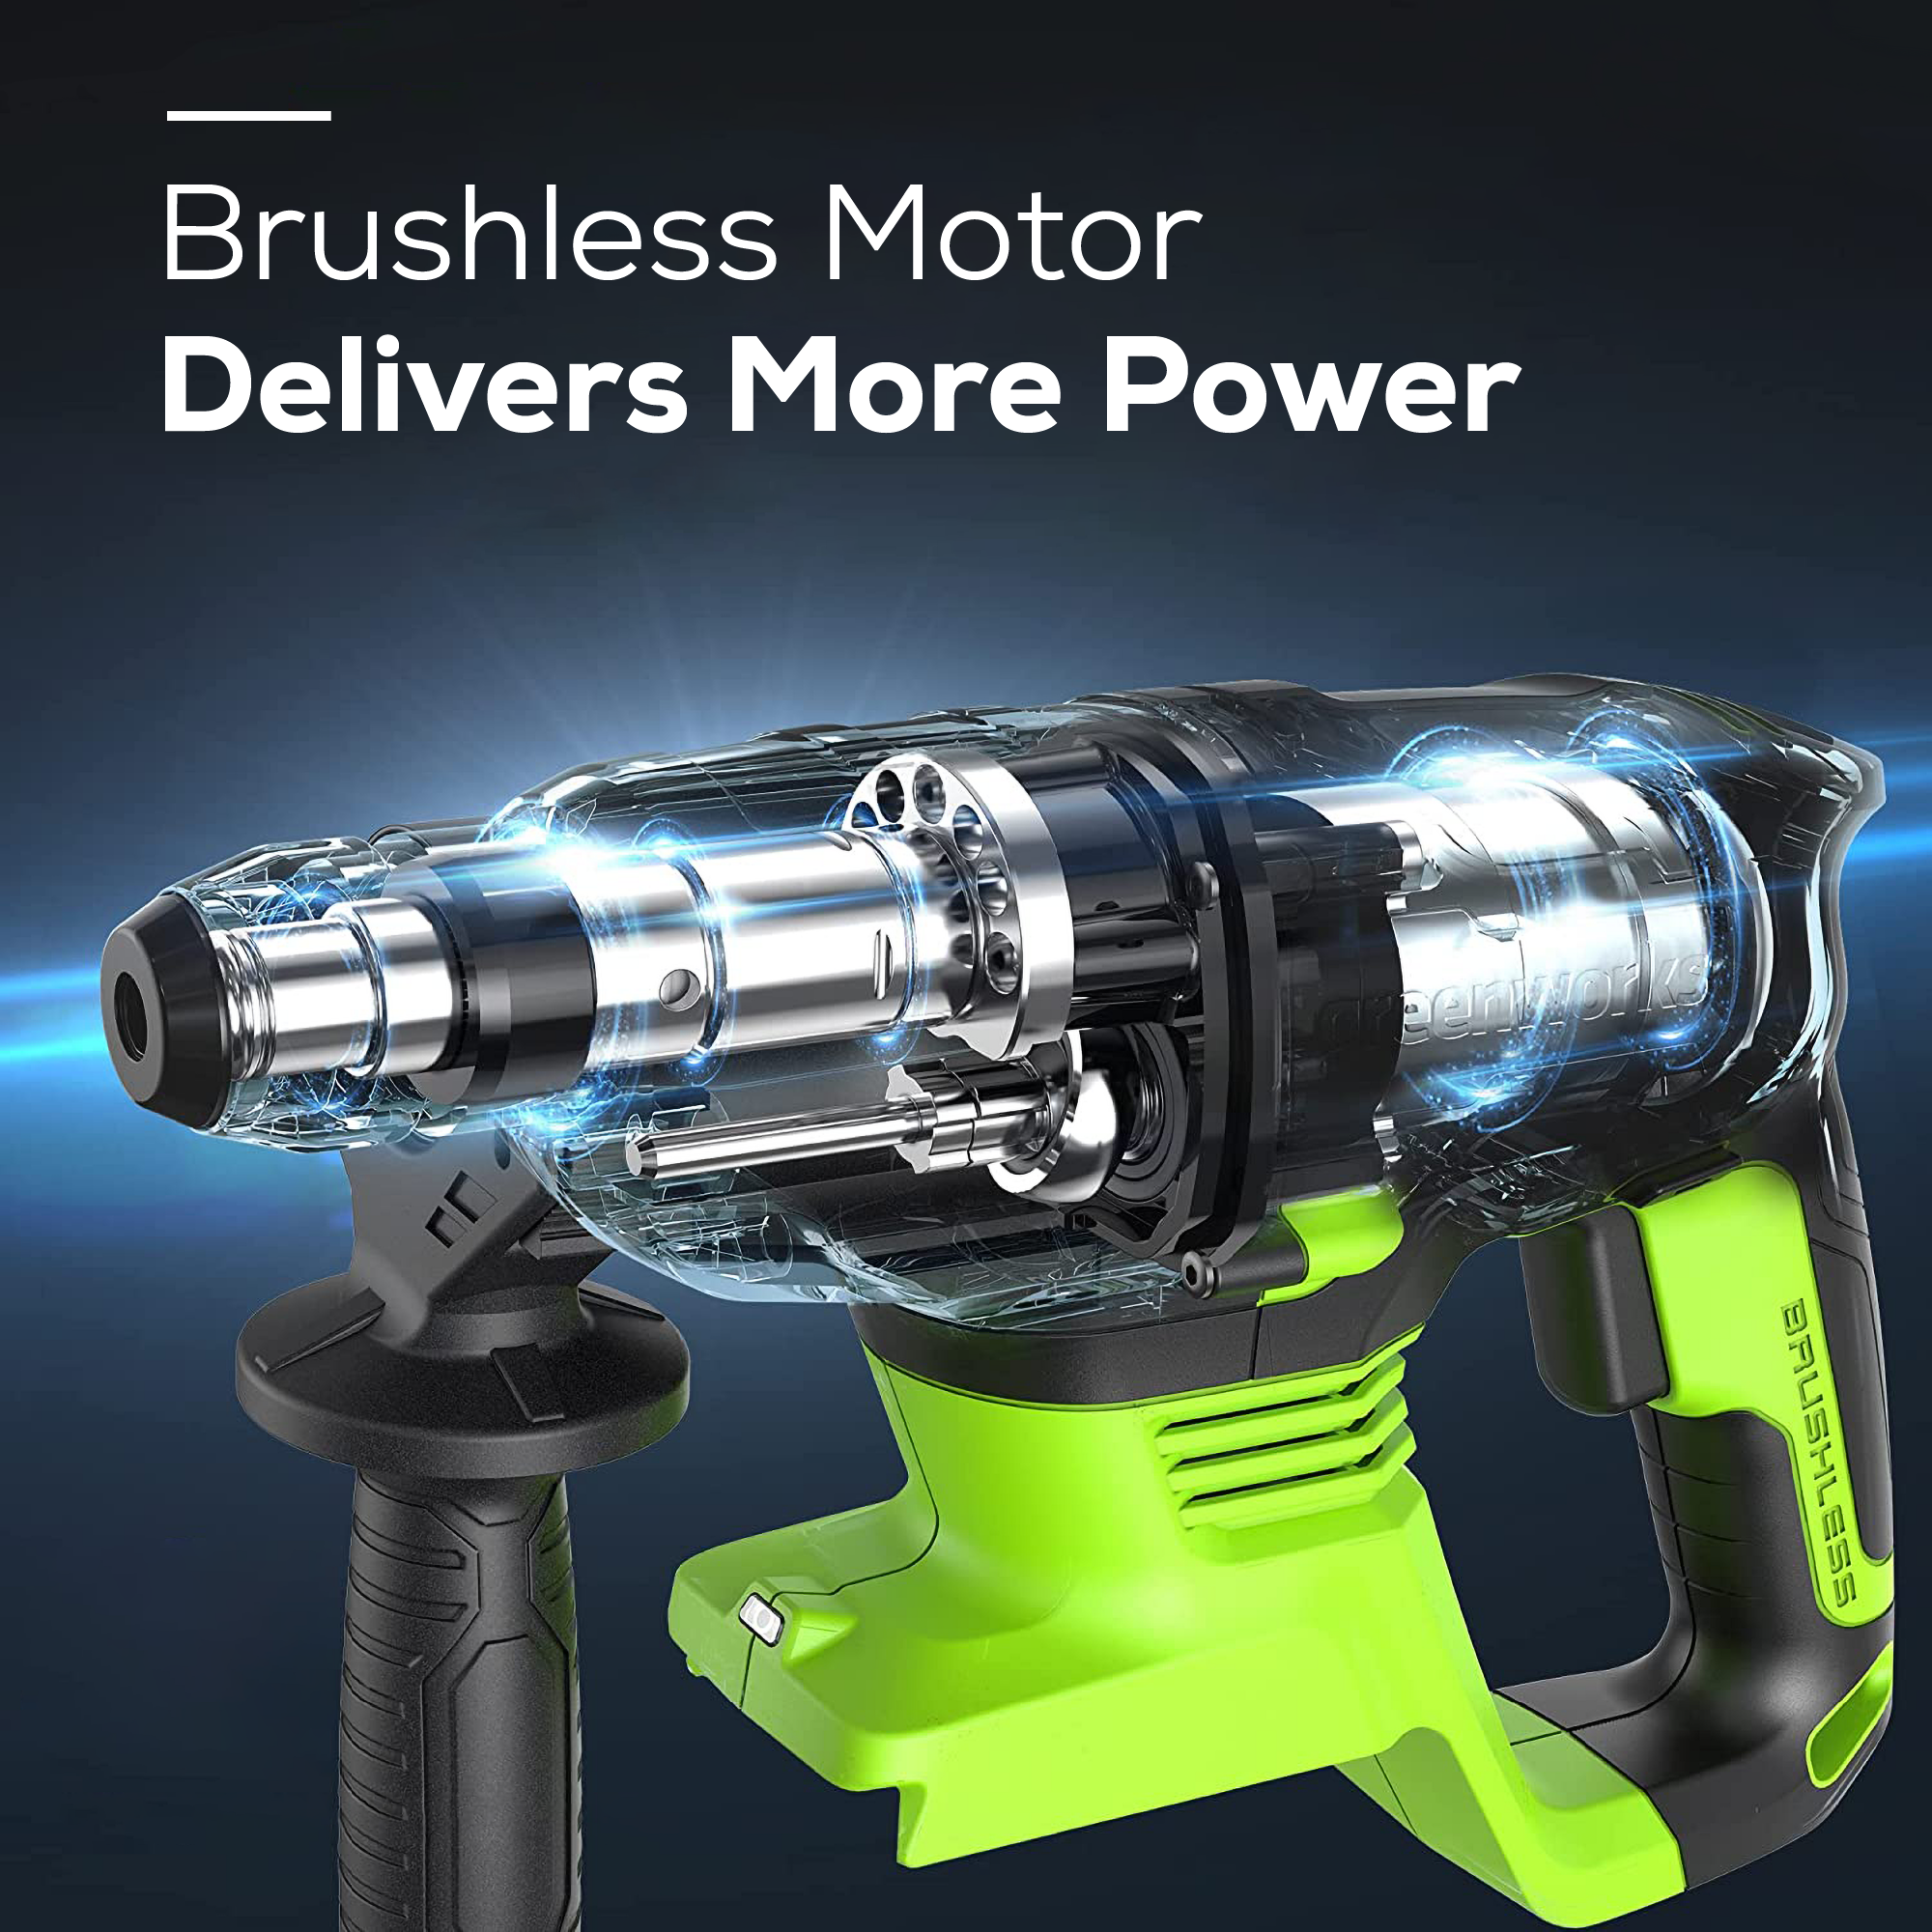 Greenworks 24V Cordless Battery Brushless SDS 2J Heavy Duty Rotary Hammer Drill w/ (1) 4 Ah USB Battery and Charger